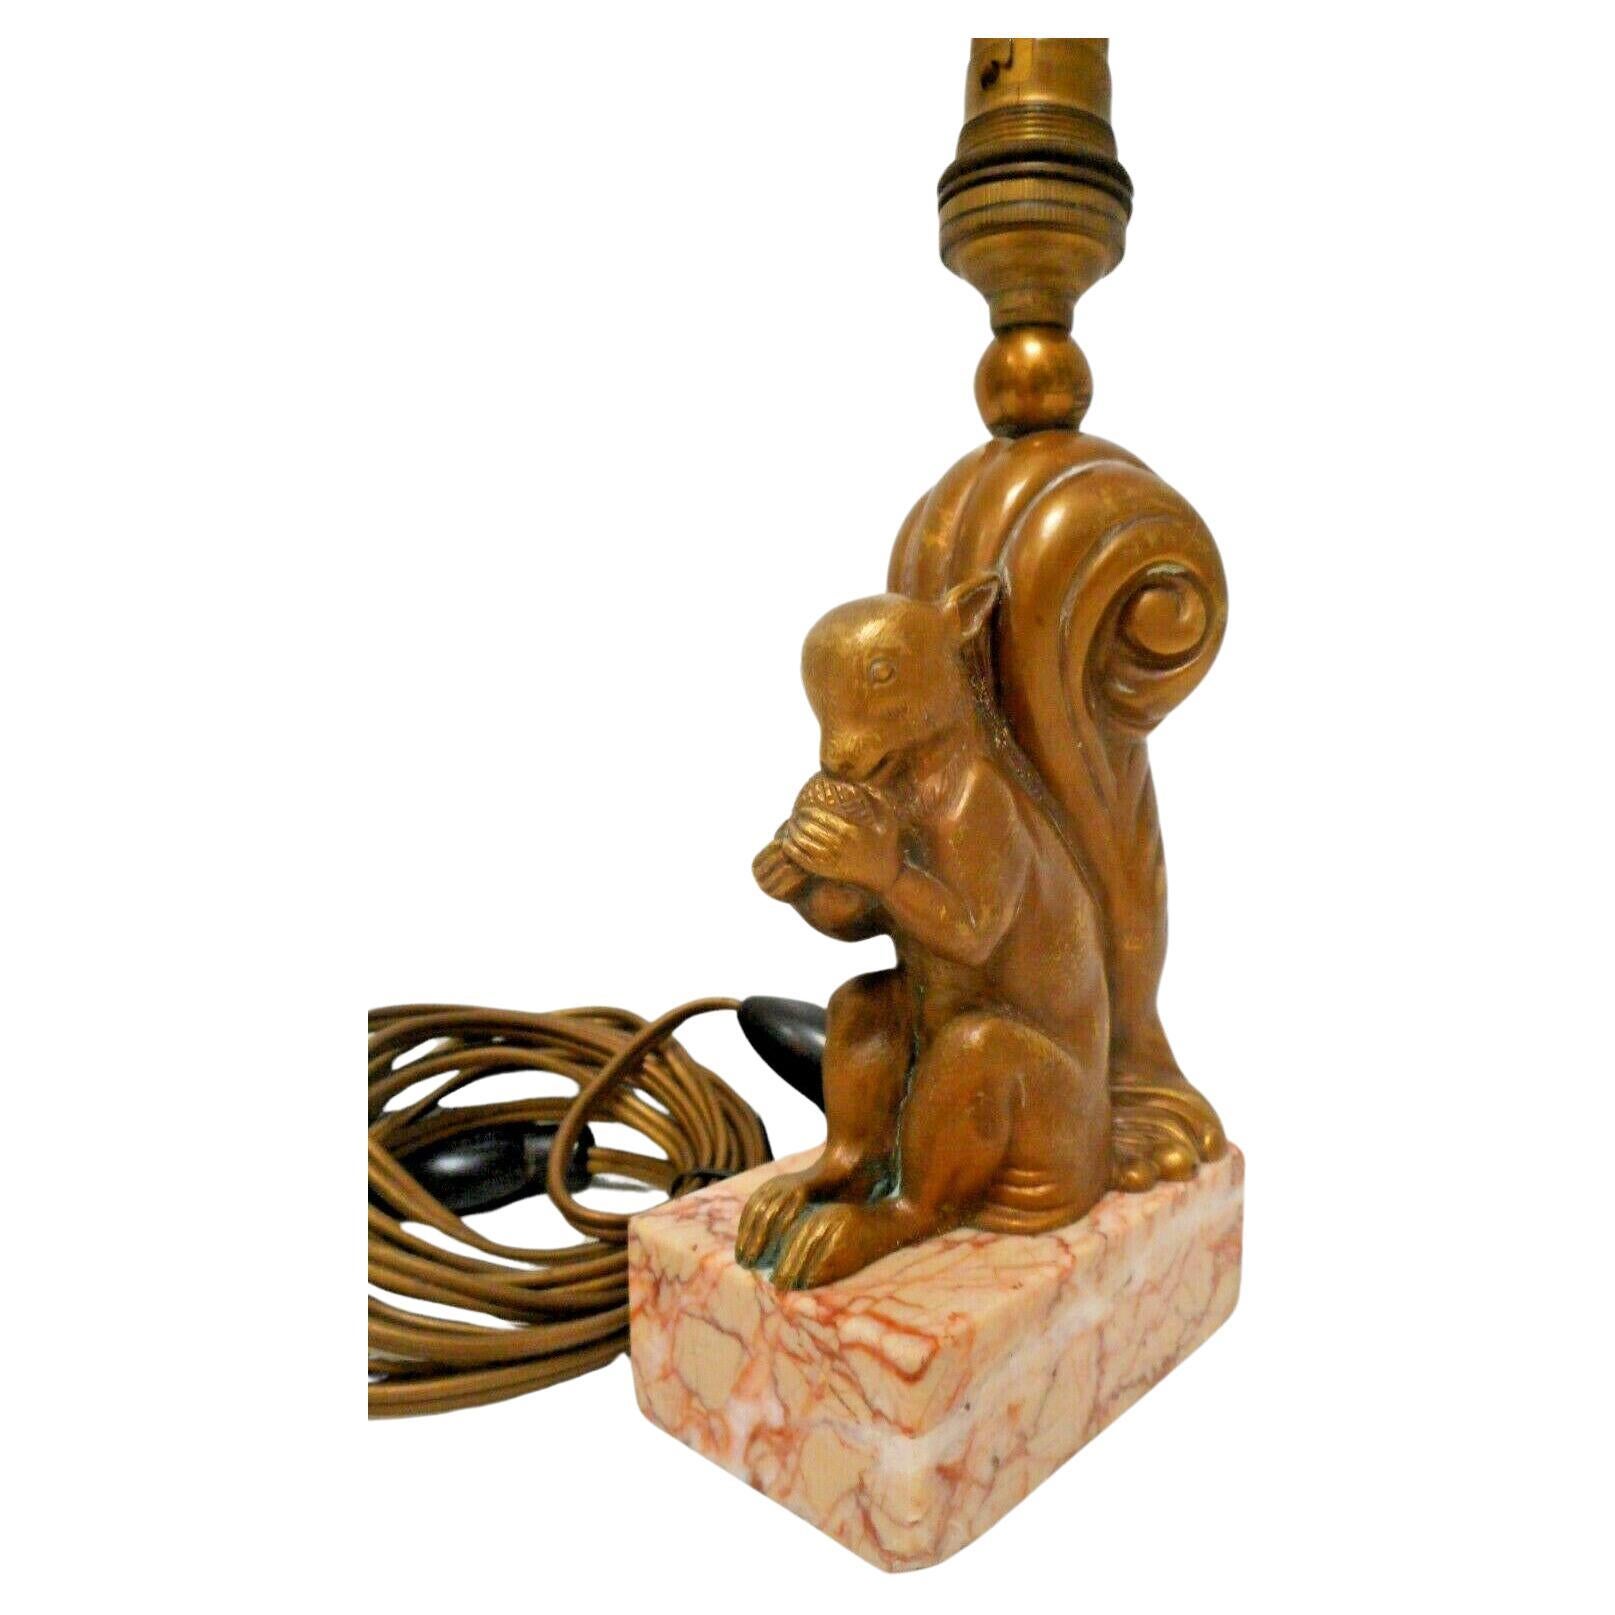 French Art Deco 1920's Gilt Bronze Sculpture Table Lamp of the Cutest Squirrel Eating his Nut; Incredible detail and sculpture on Marble Base. Very high quality Table Lamp. Heavy lamp with incredible detail.